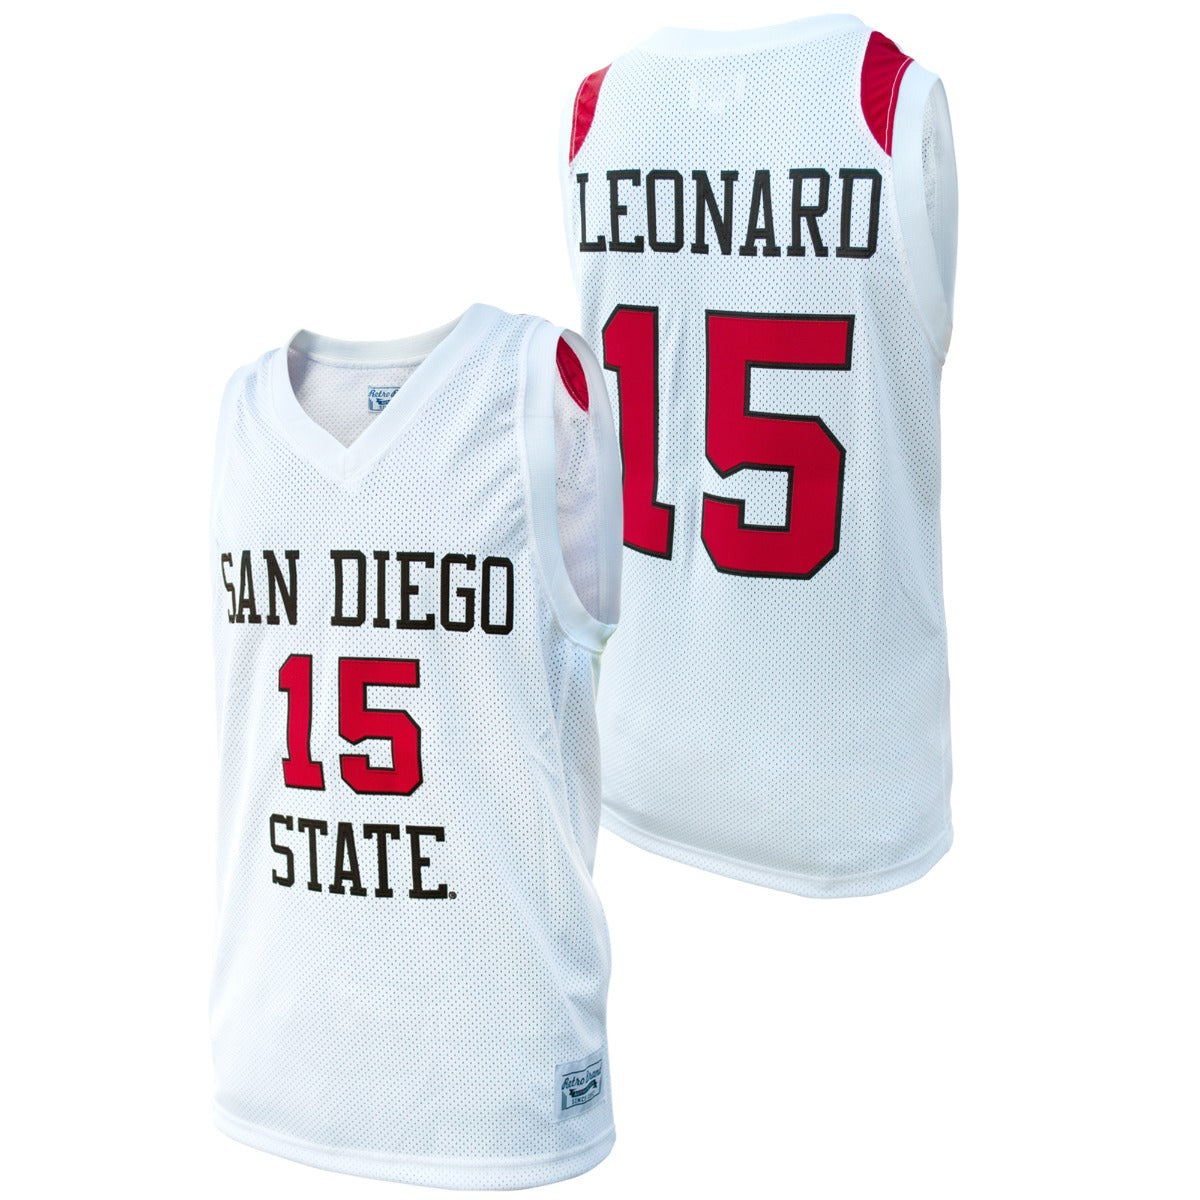 SDSU Bookstore - Black Kawhi jerseys are BACK IN STOCK❗️Gear up and cheer  on SDSU Alumni, Kawhi Leonard, in Game 6 of the #NBAFinals ! - Who wins  tomorrow night? 🦖 or 🌉 COMMENT BELOW 👇